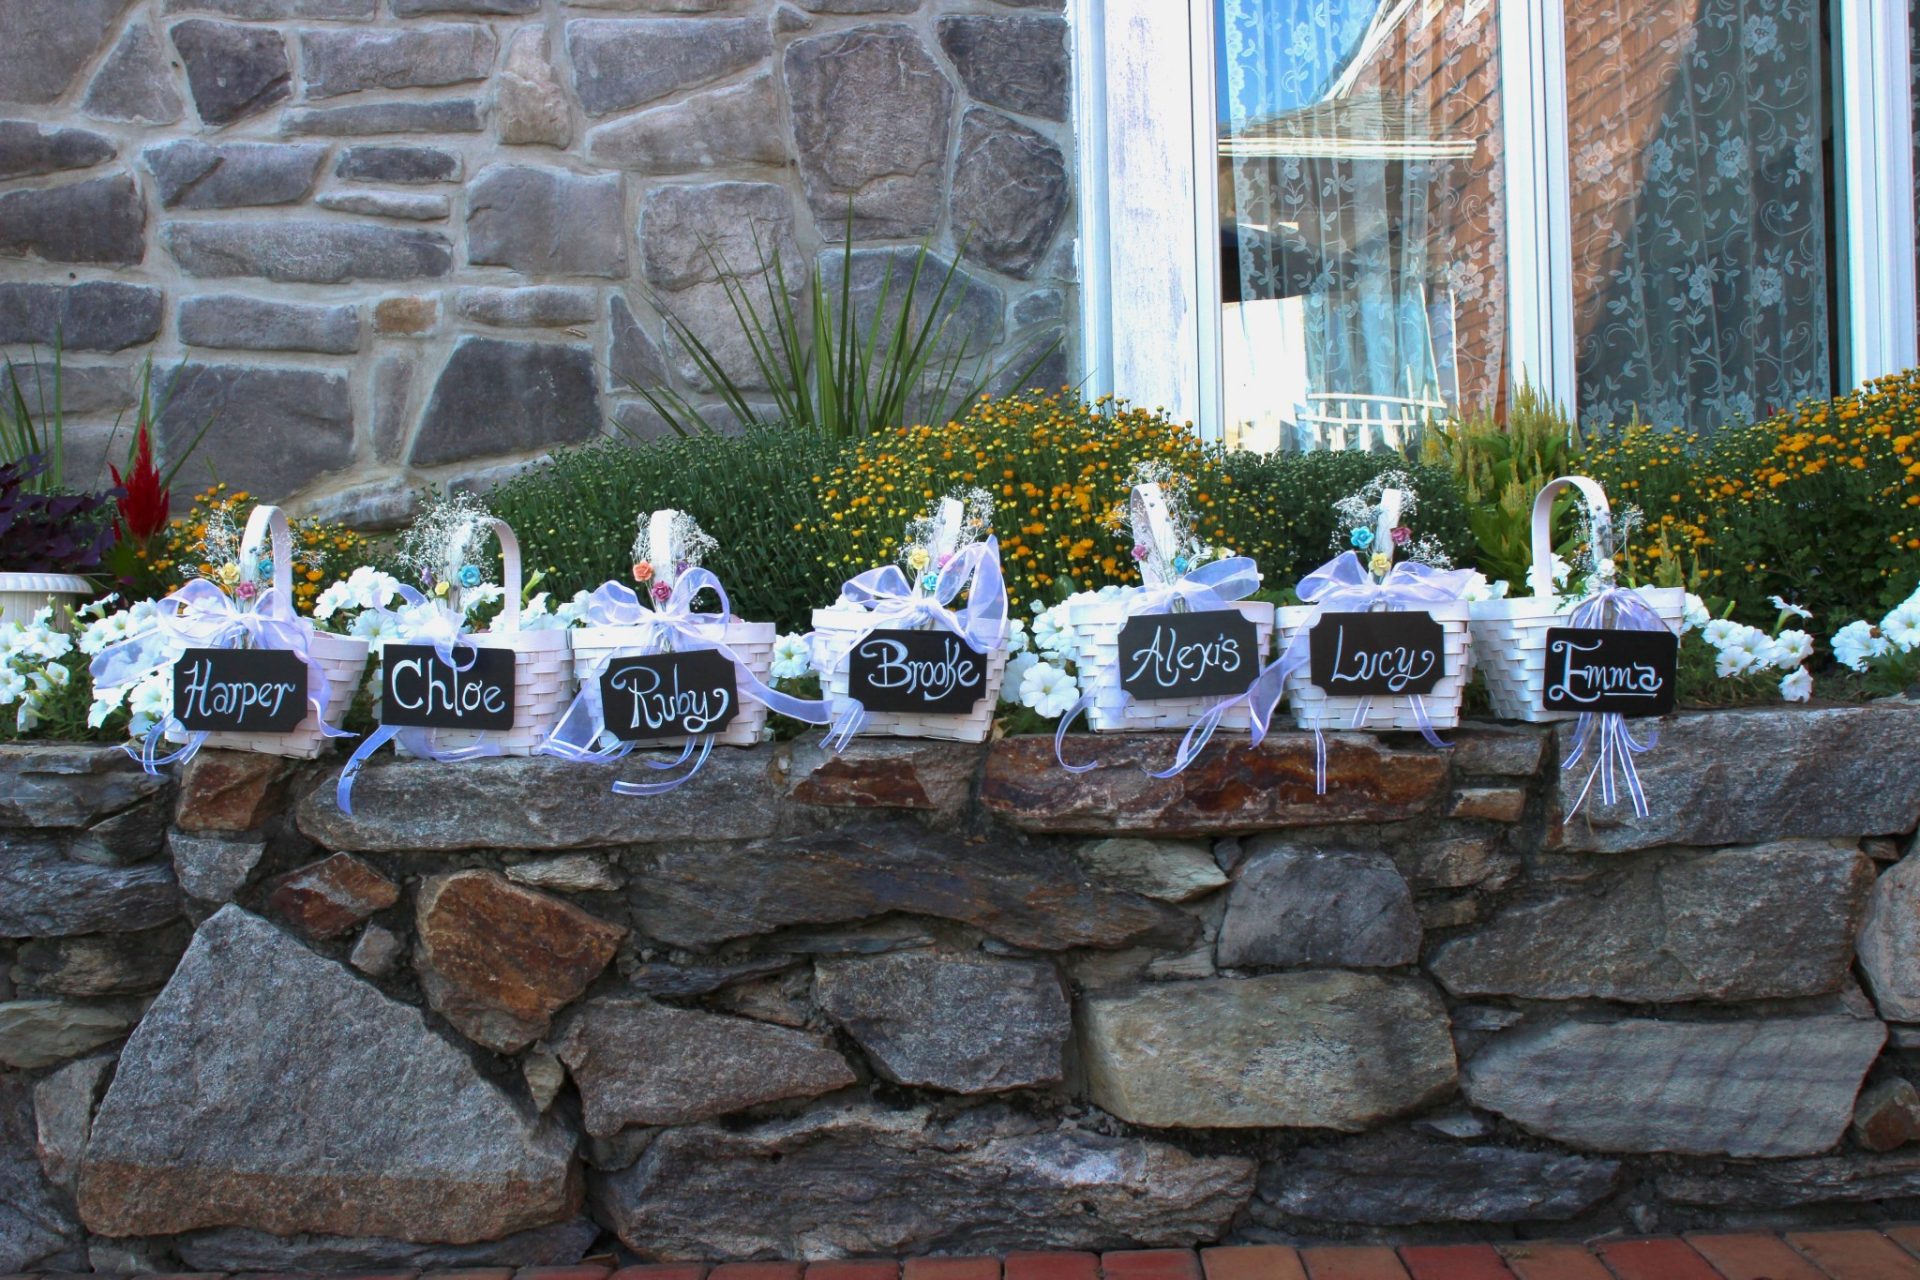 Flower girl baskets sit on stone wall before wedding